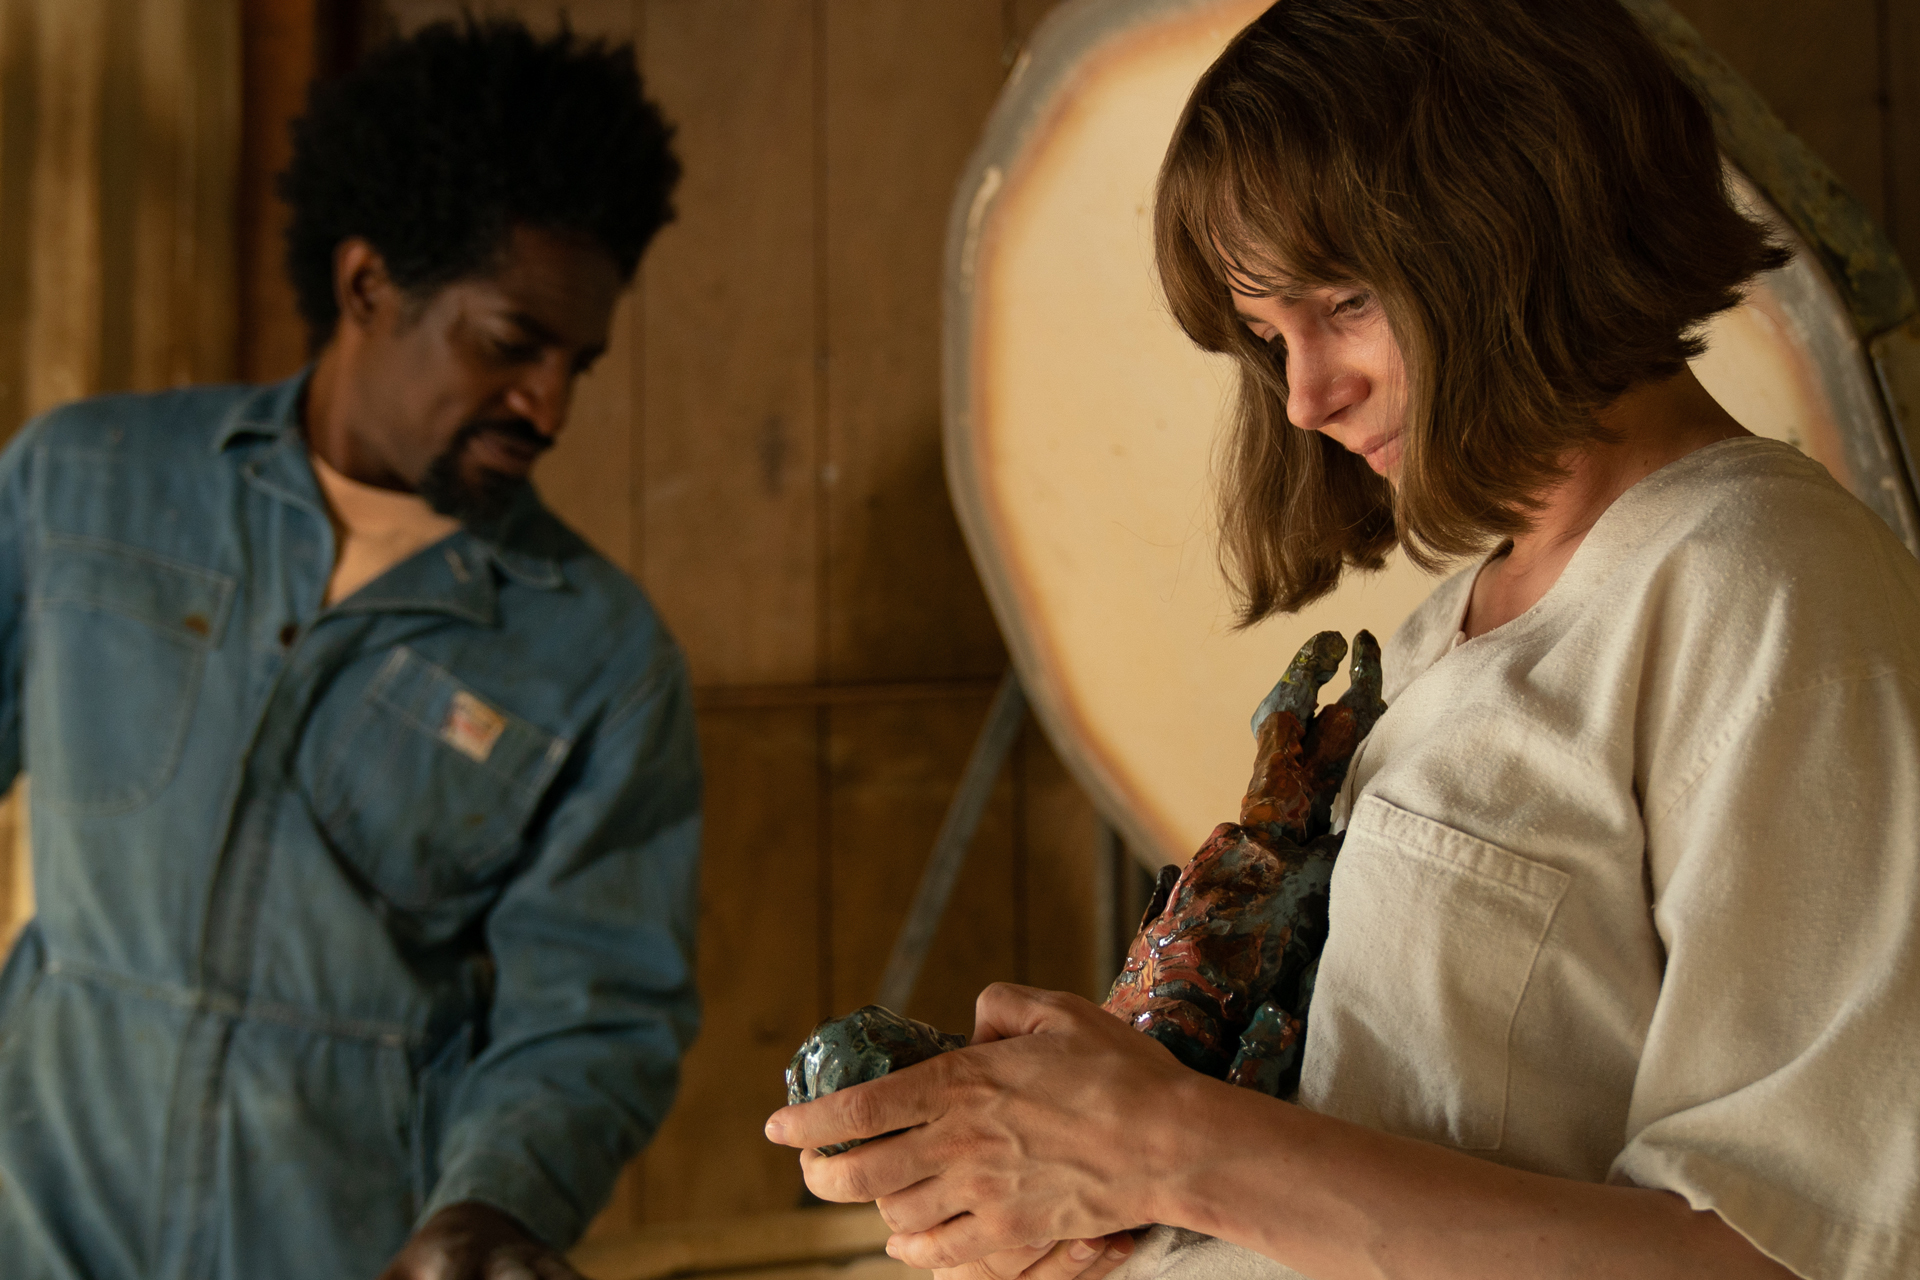 White woman with bob holds sculpture in hands, a Black man in coveralls stands behind her over kiln